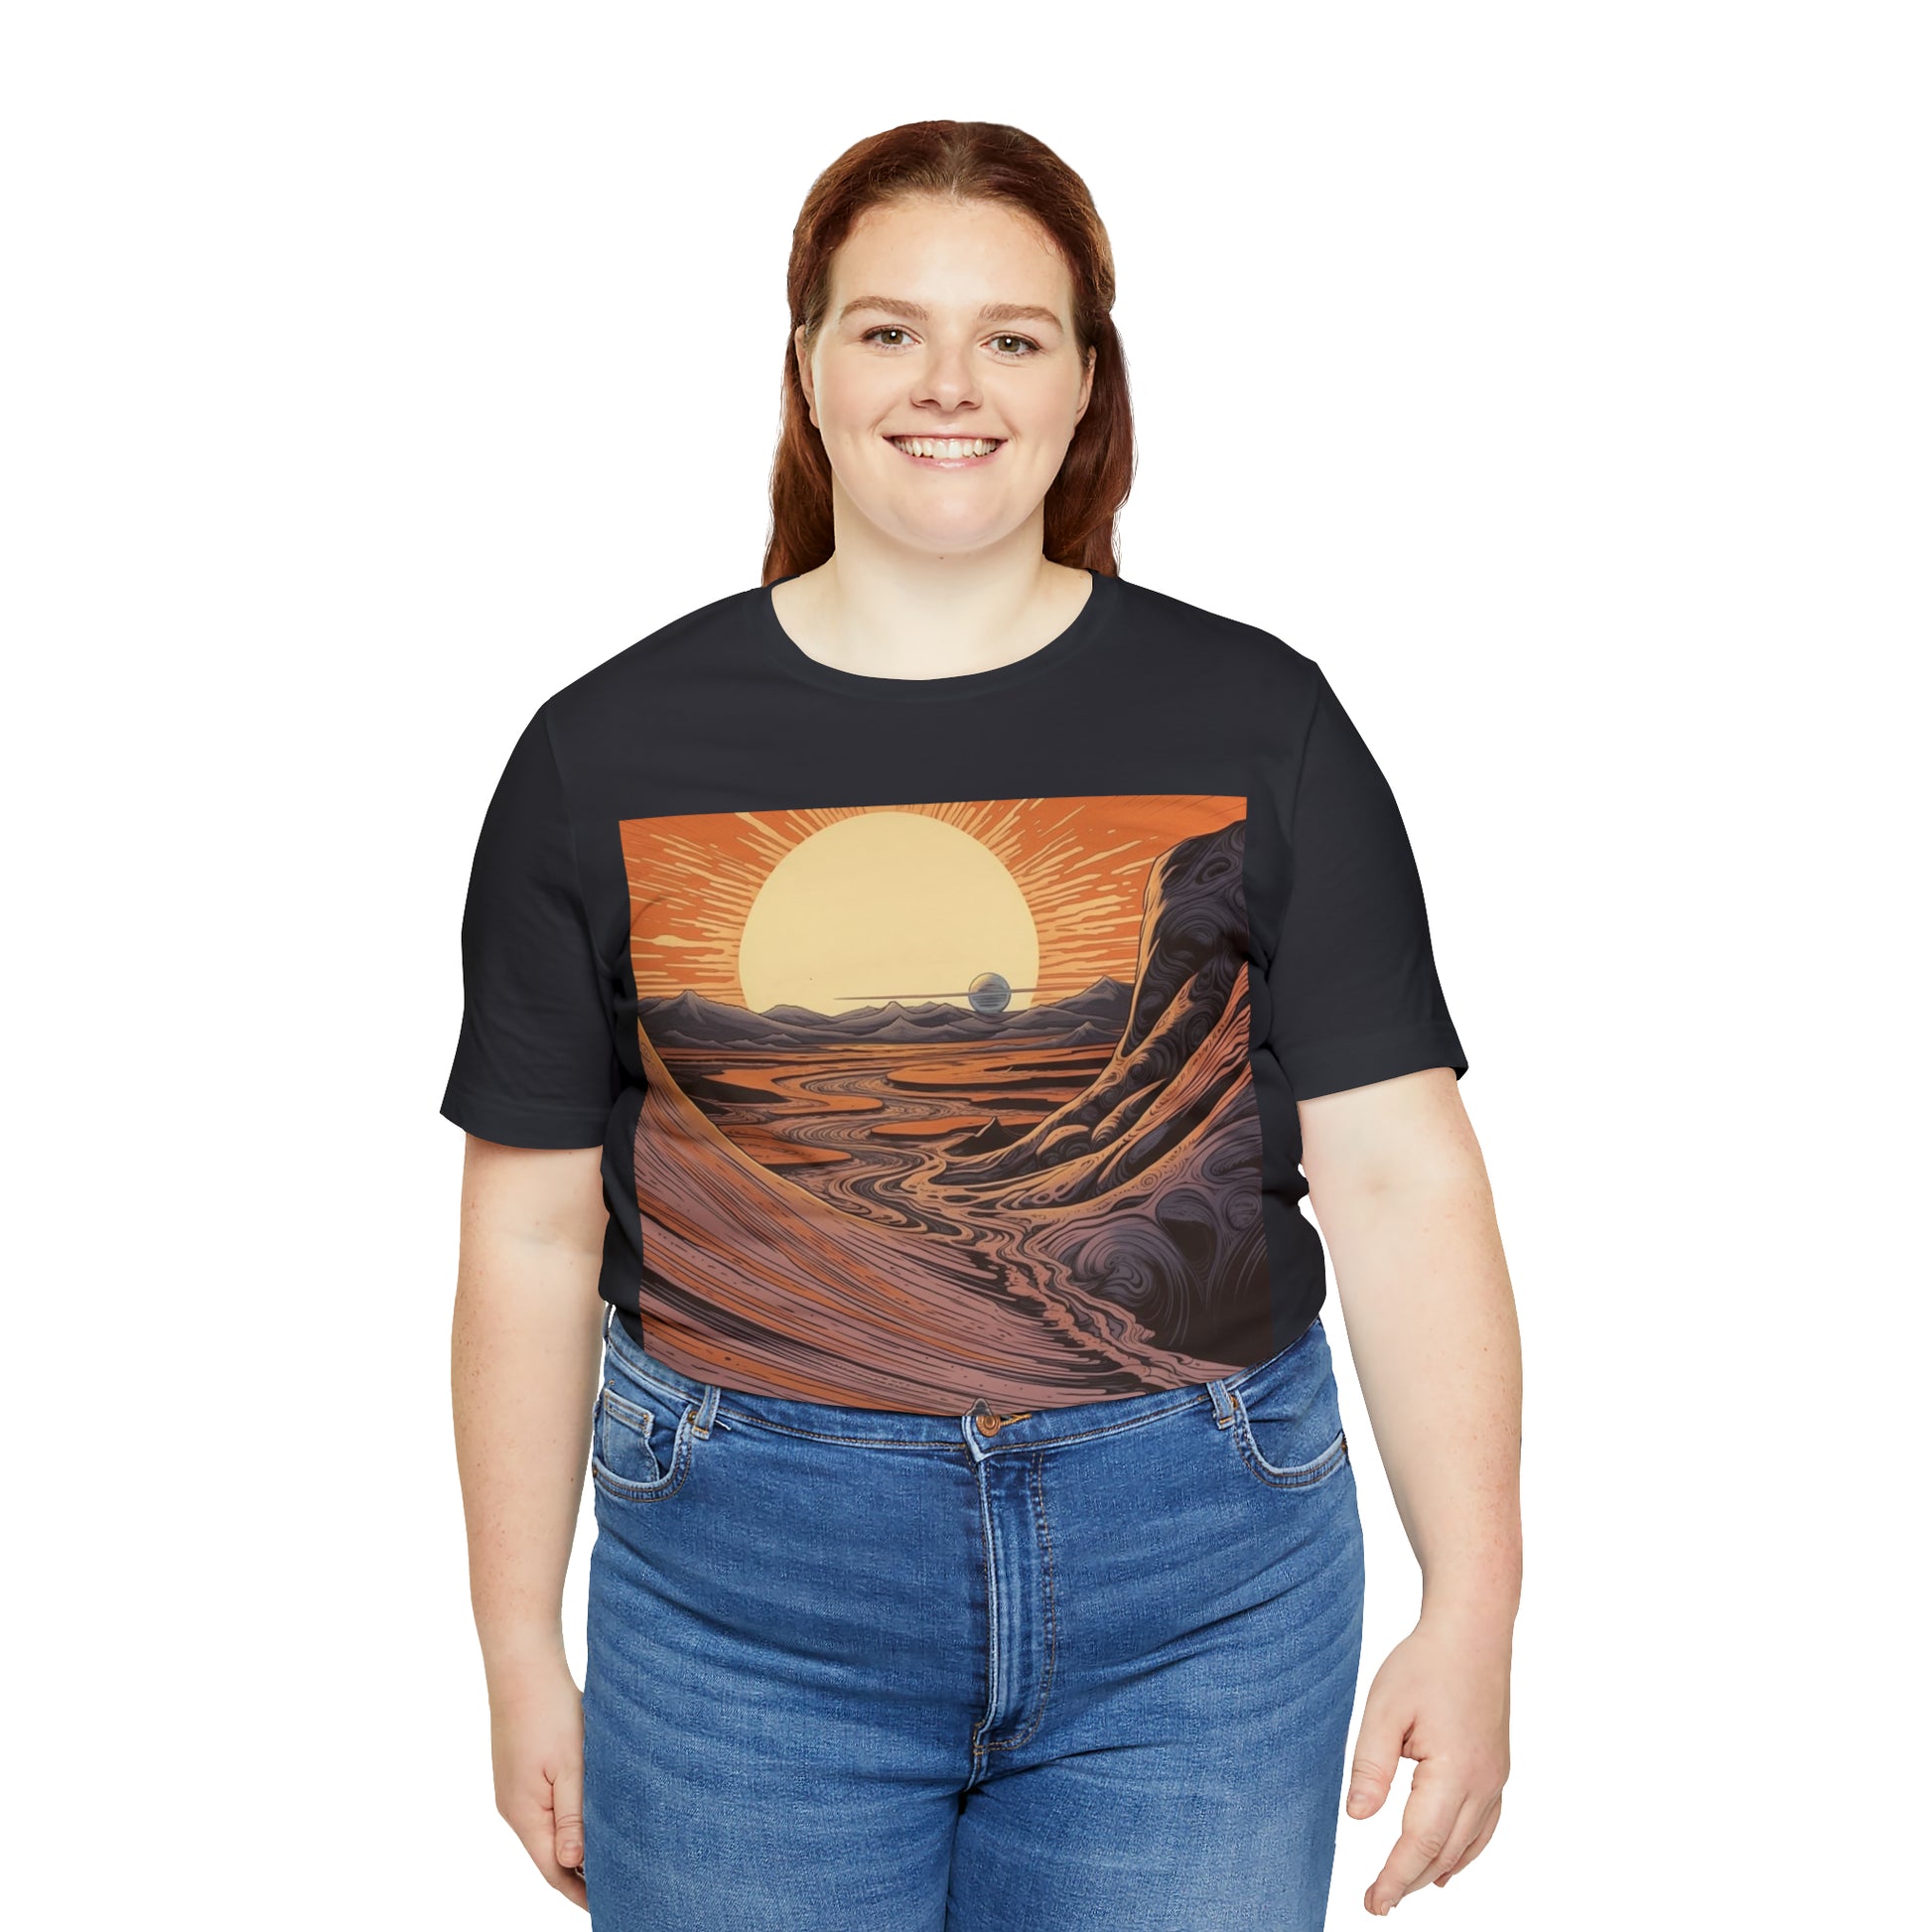 dark-grey-quest-thread-tee-shirt-with-large-sunrise-over-dunes-on-center-of-shirt